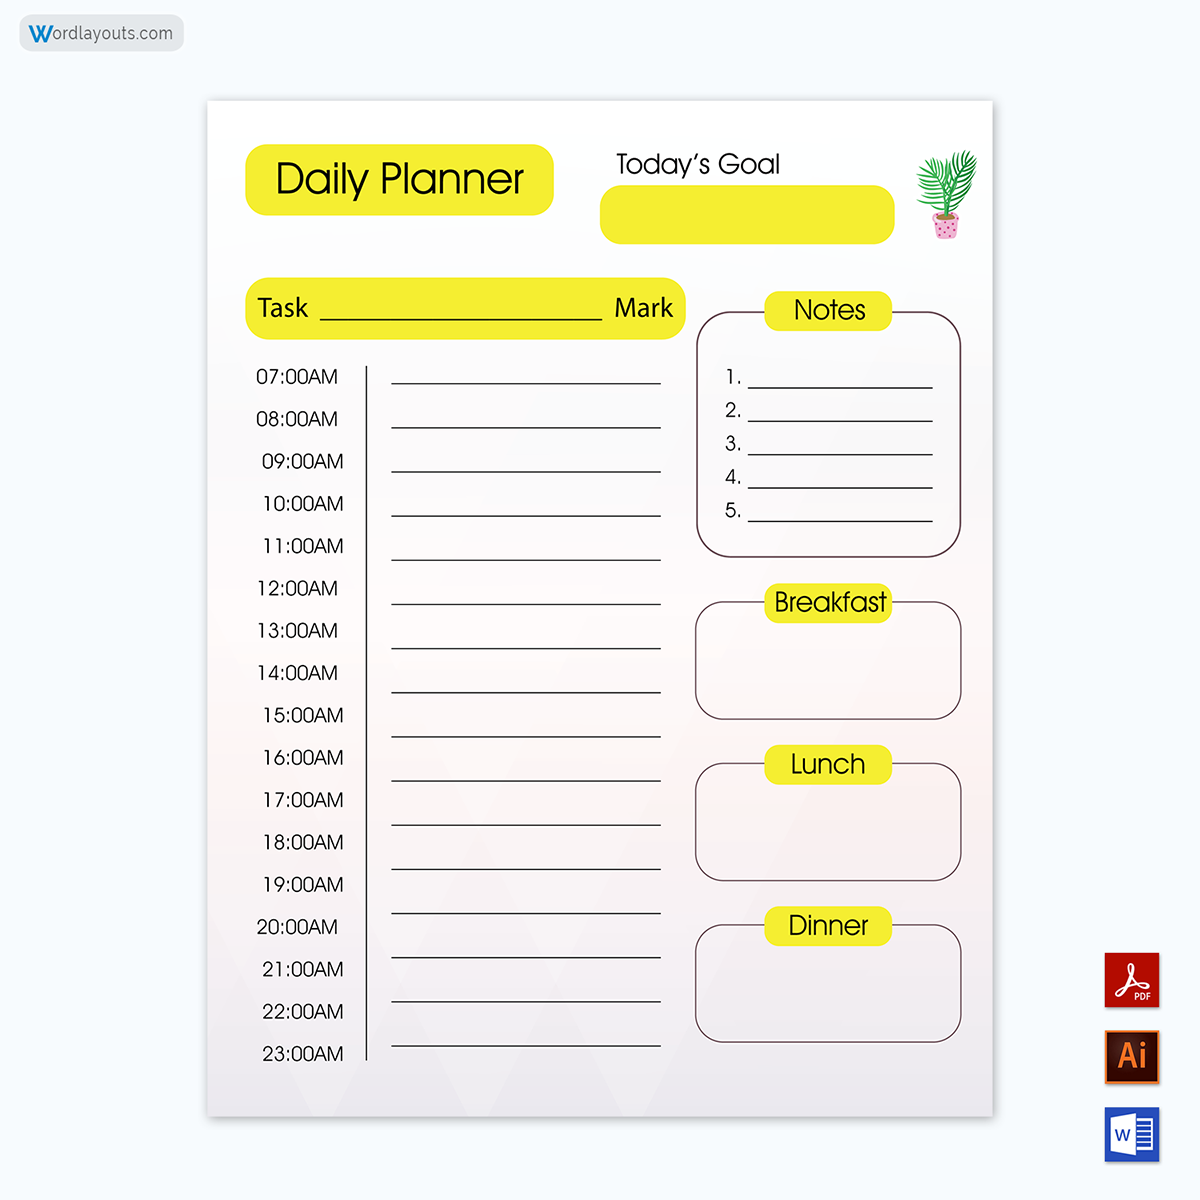 Daily Planner Template-8669ndnjp-06-23-p01